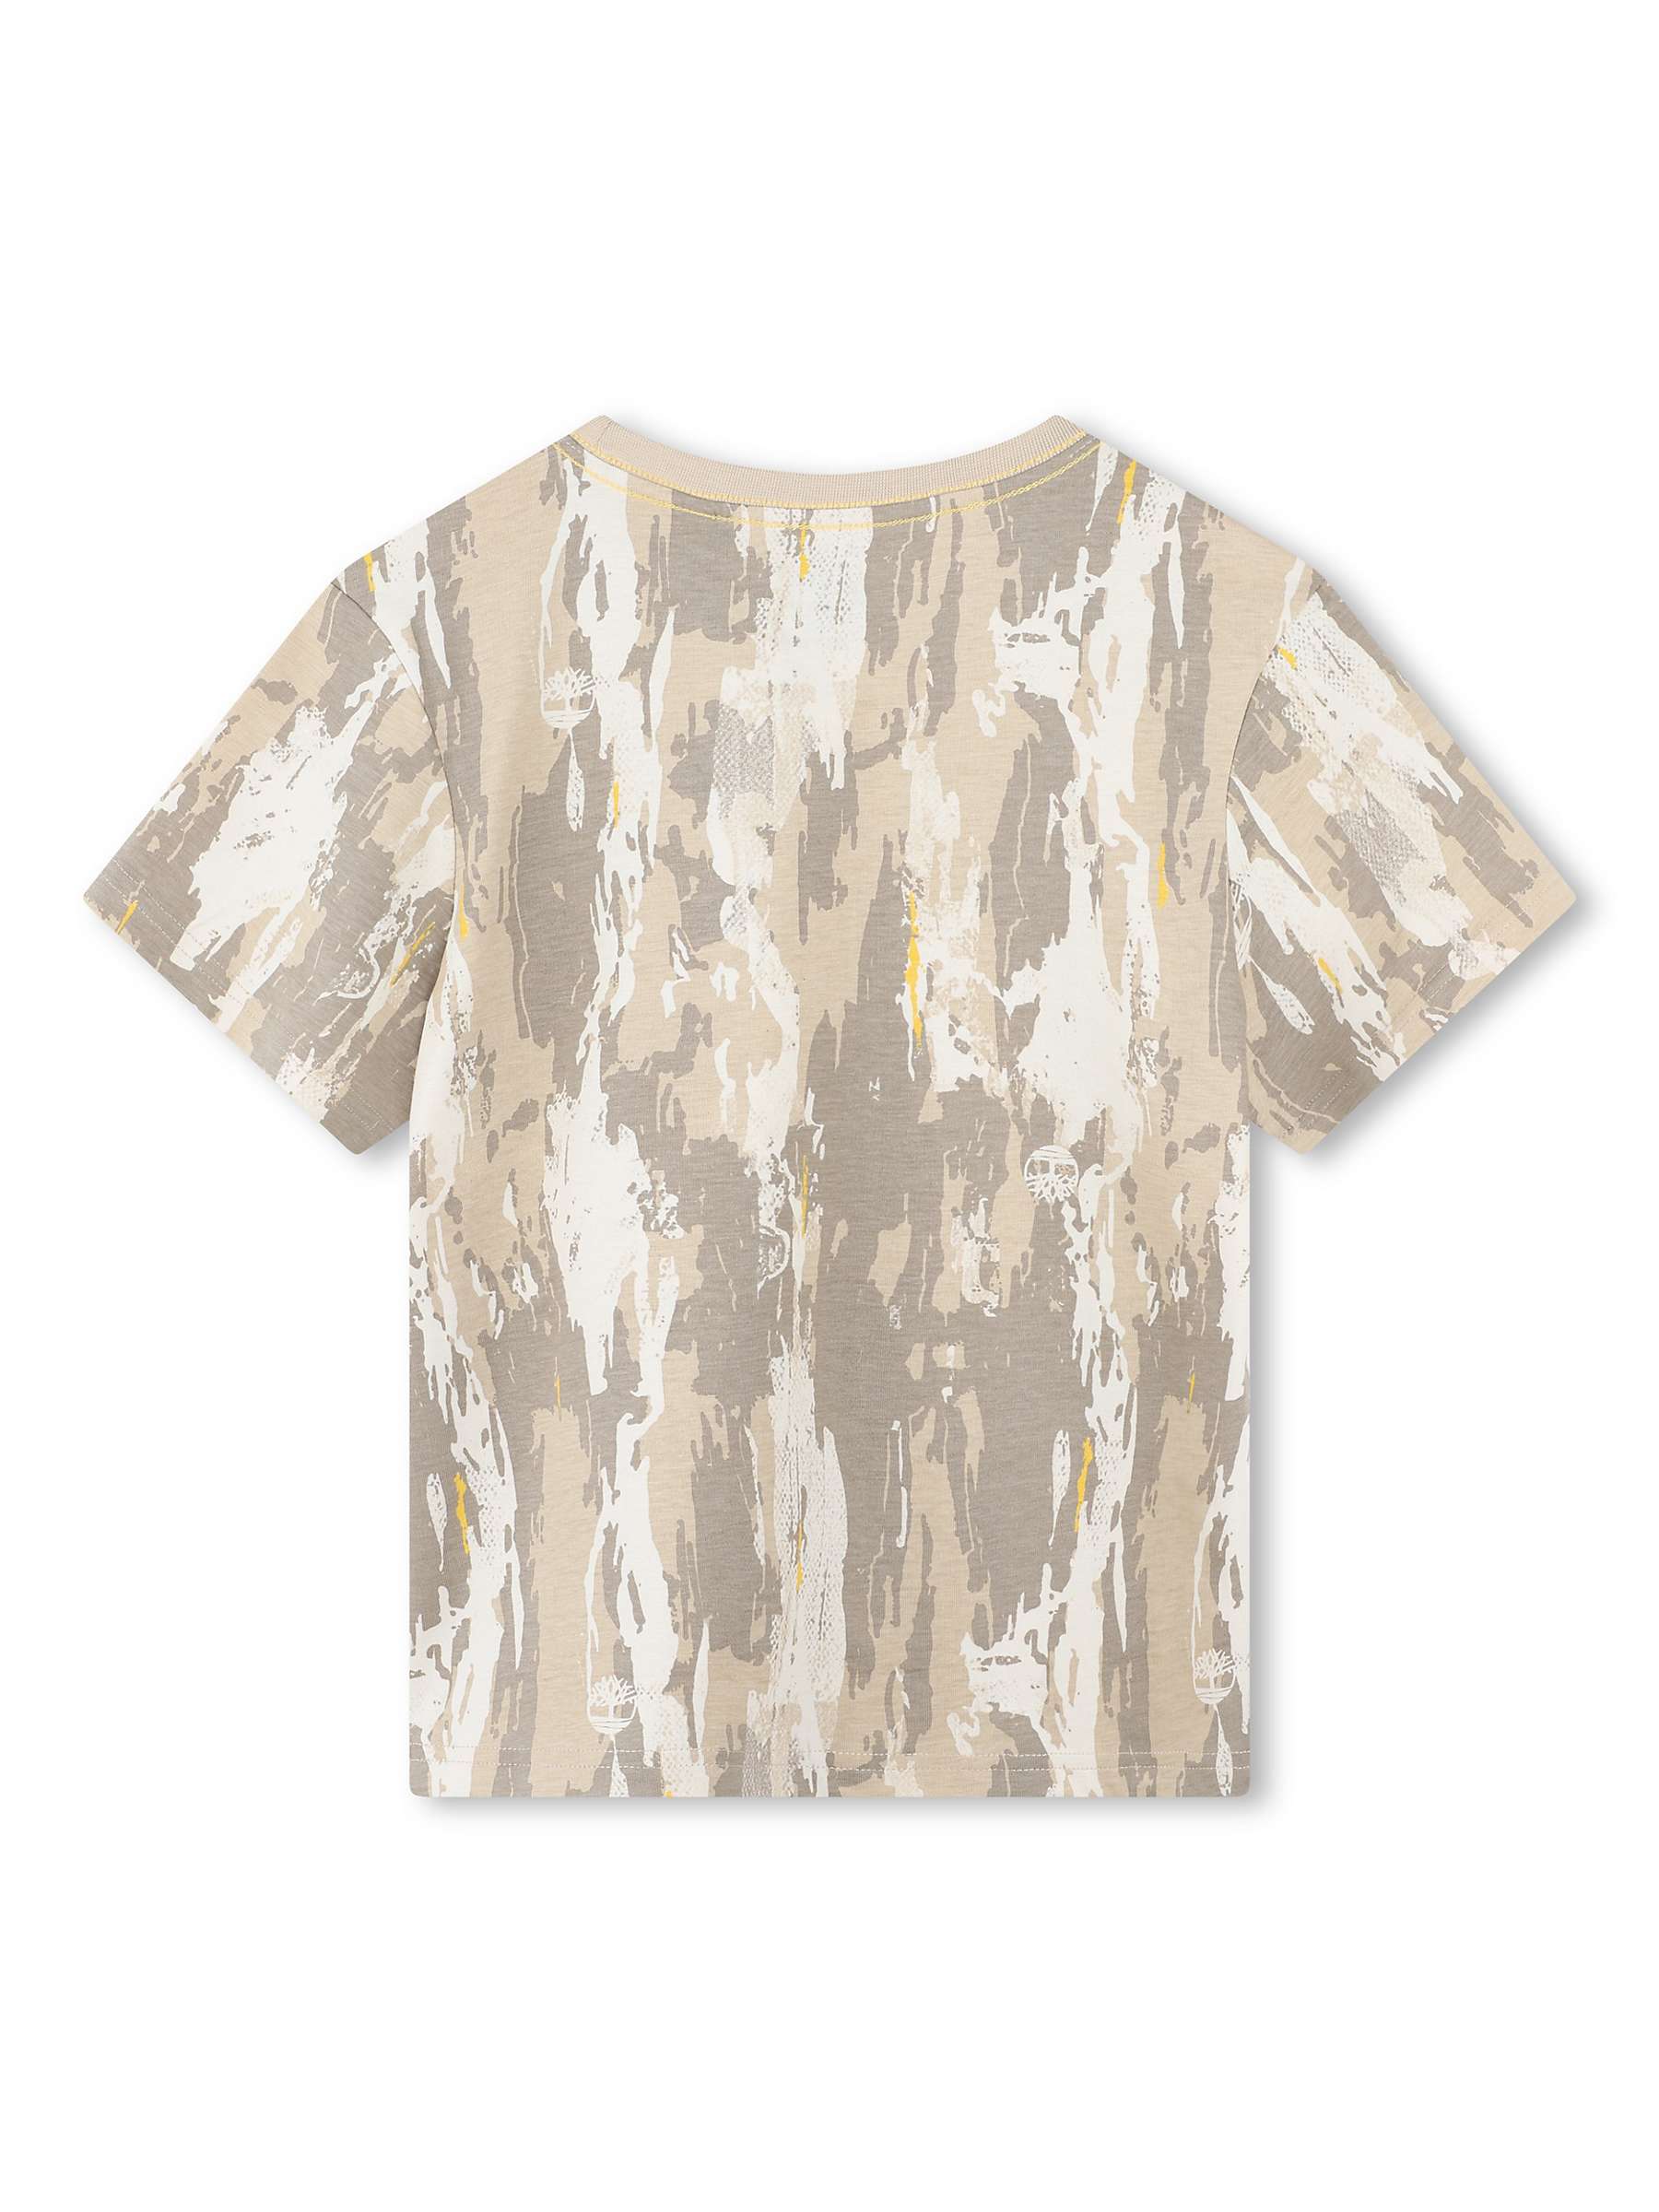 Buy Timberland Kids' Fancy Logo Abstract Print T-Shirt, Natural Online at johnlewis.com